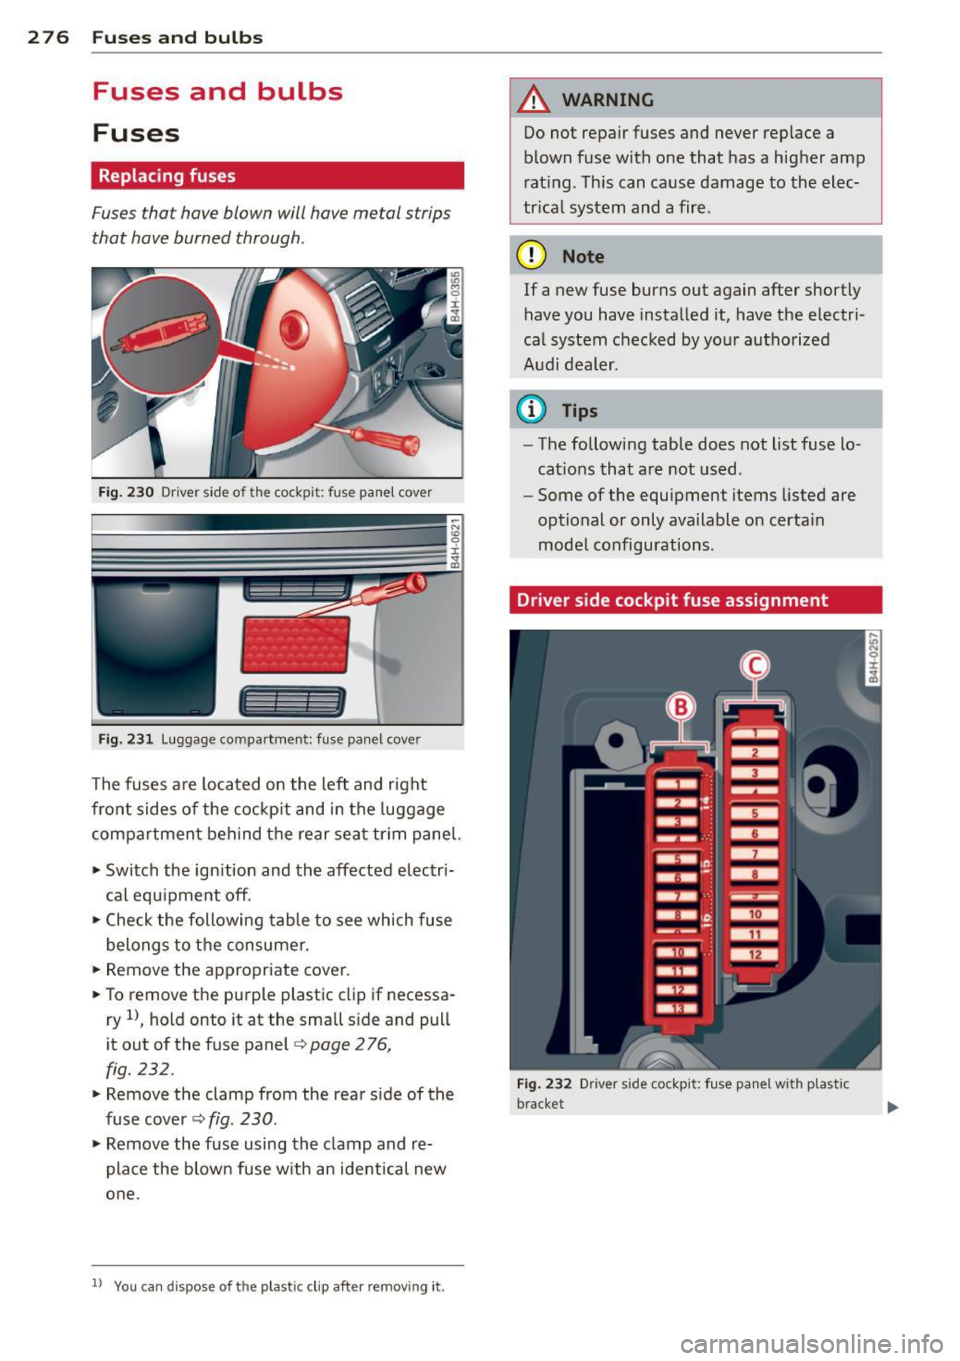 AUDI S8 2015  Owners Manual 2 76  Fuses  and  bulbs 
Fuses  and  bulbs 
Fuses 
Replacing  fuses 
Fuses  that have blown  will have metal  strips 
that  have  burned  through. 
Fig. 230 Dr iver  side of  the cockpit:  fuse  panel